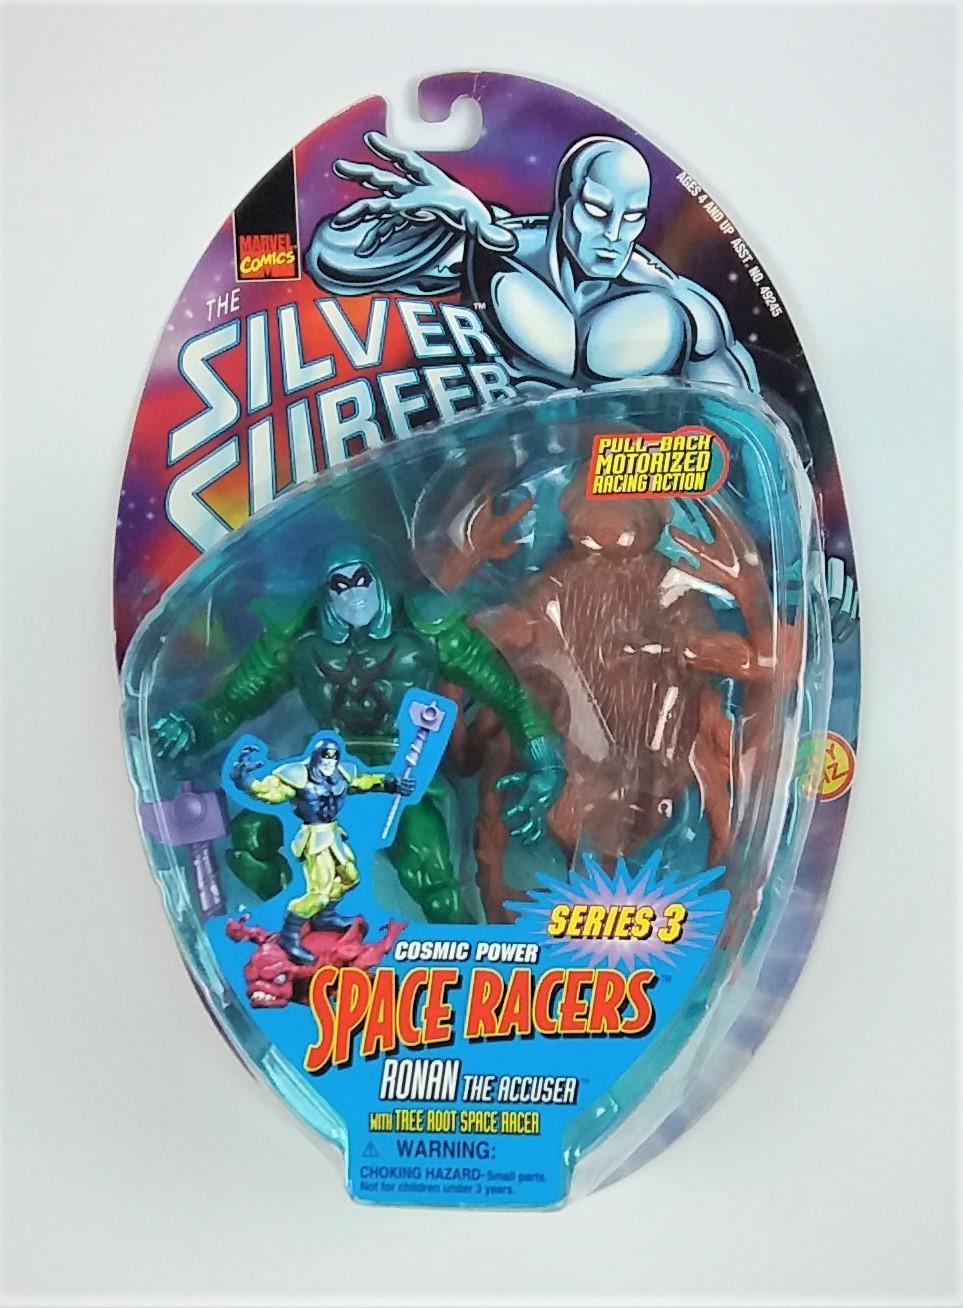 Ronan the Accuser Cosmic Power Space Racers Silver Surfer Marvel Carded Toy Biz Action Figure